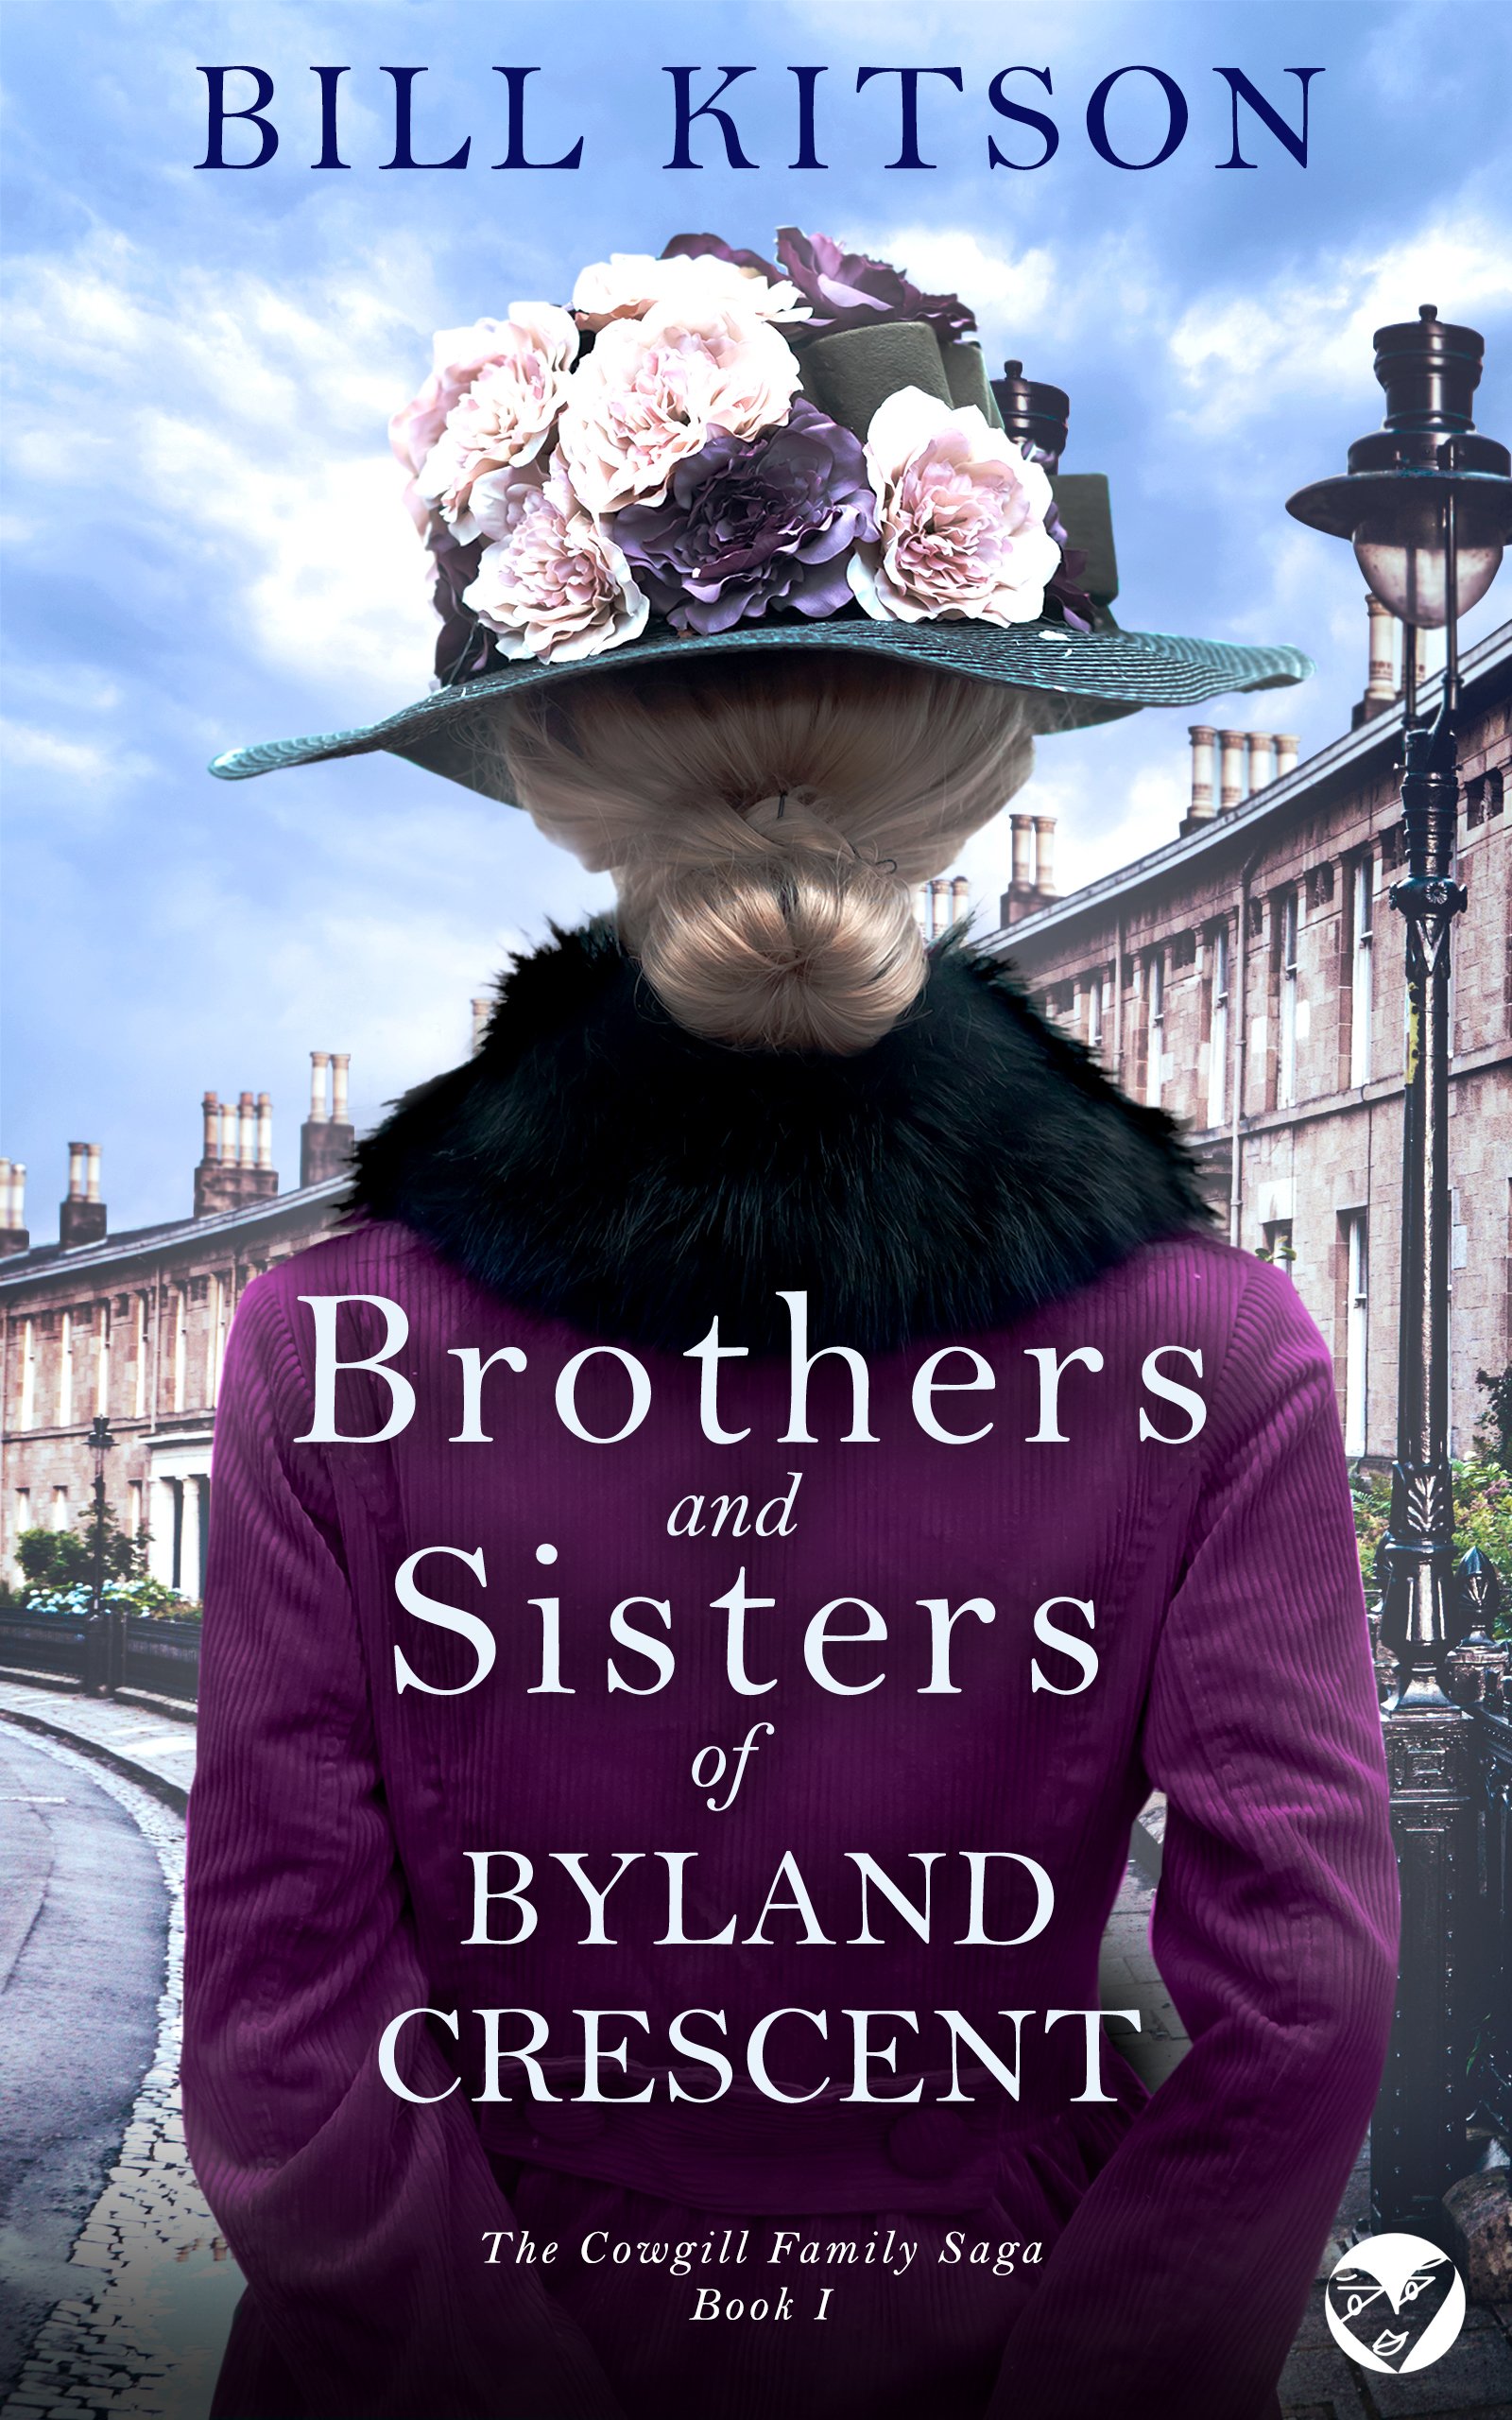 BROTHERS AND SISTERS OF BYLAND CRESCENT PUBLISH.jpg